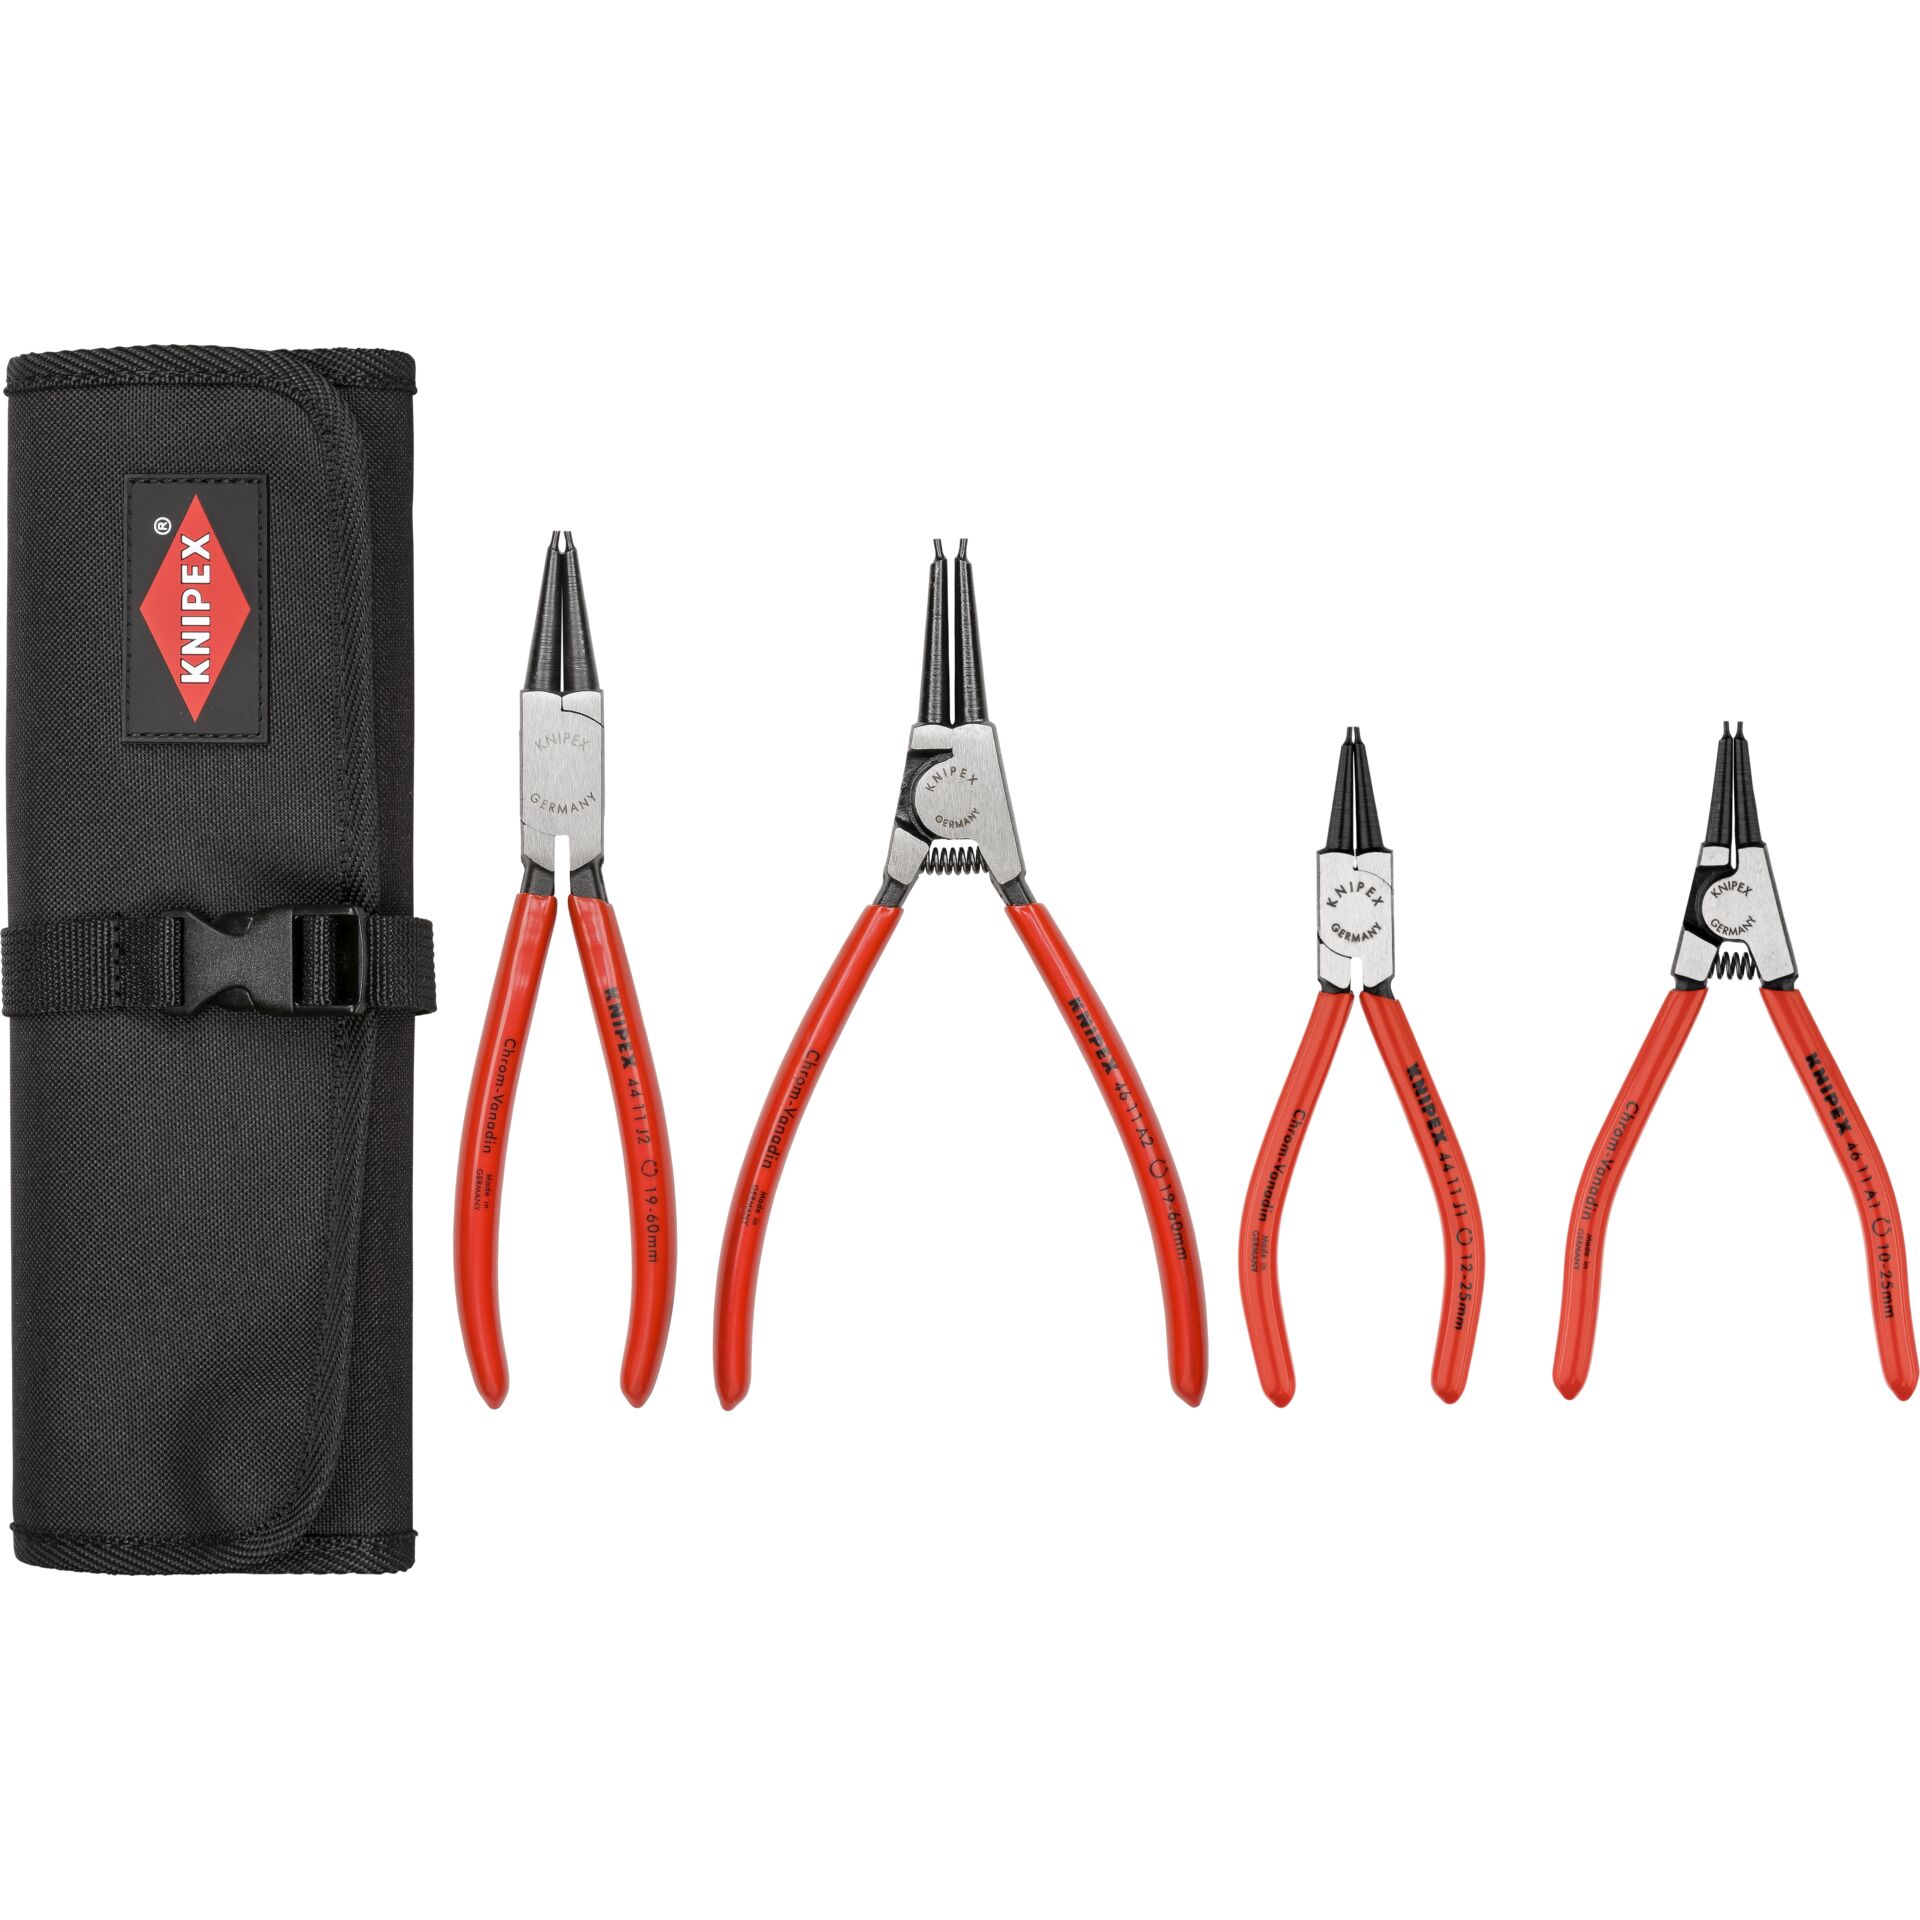 KNIPEX Circlip Pliers Set Bag with 4 Pliers